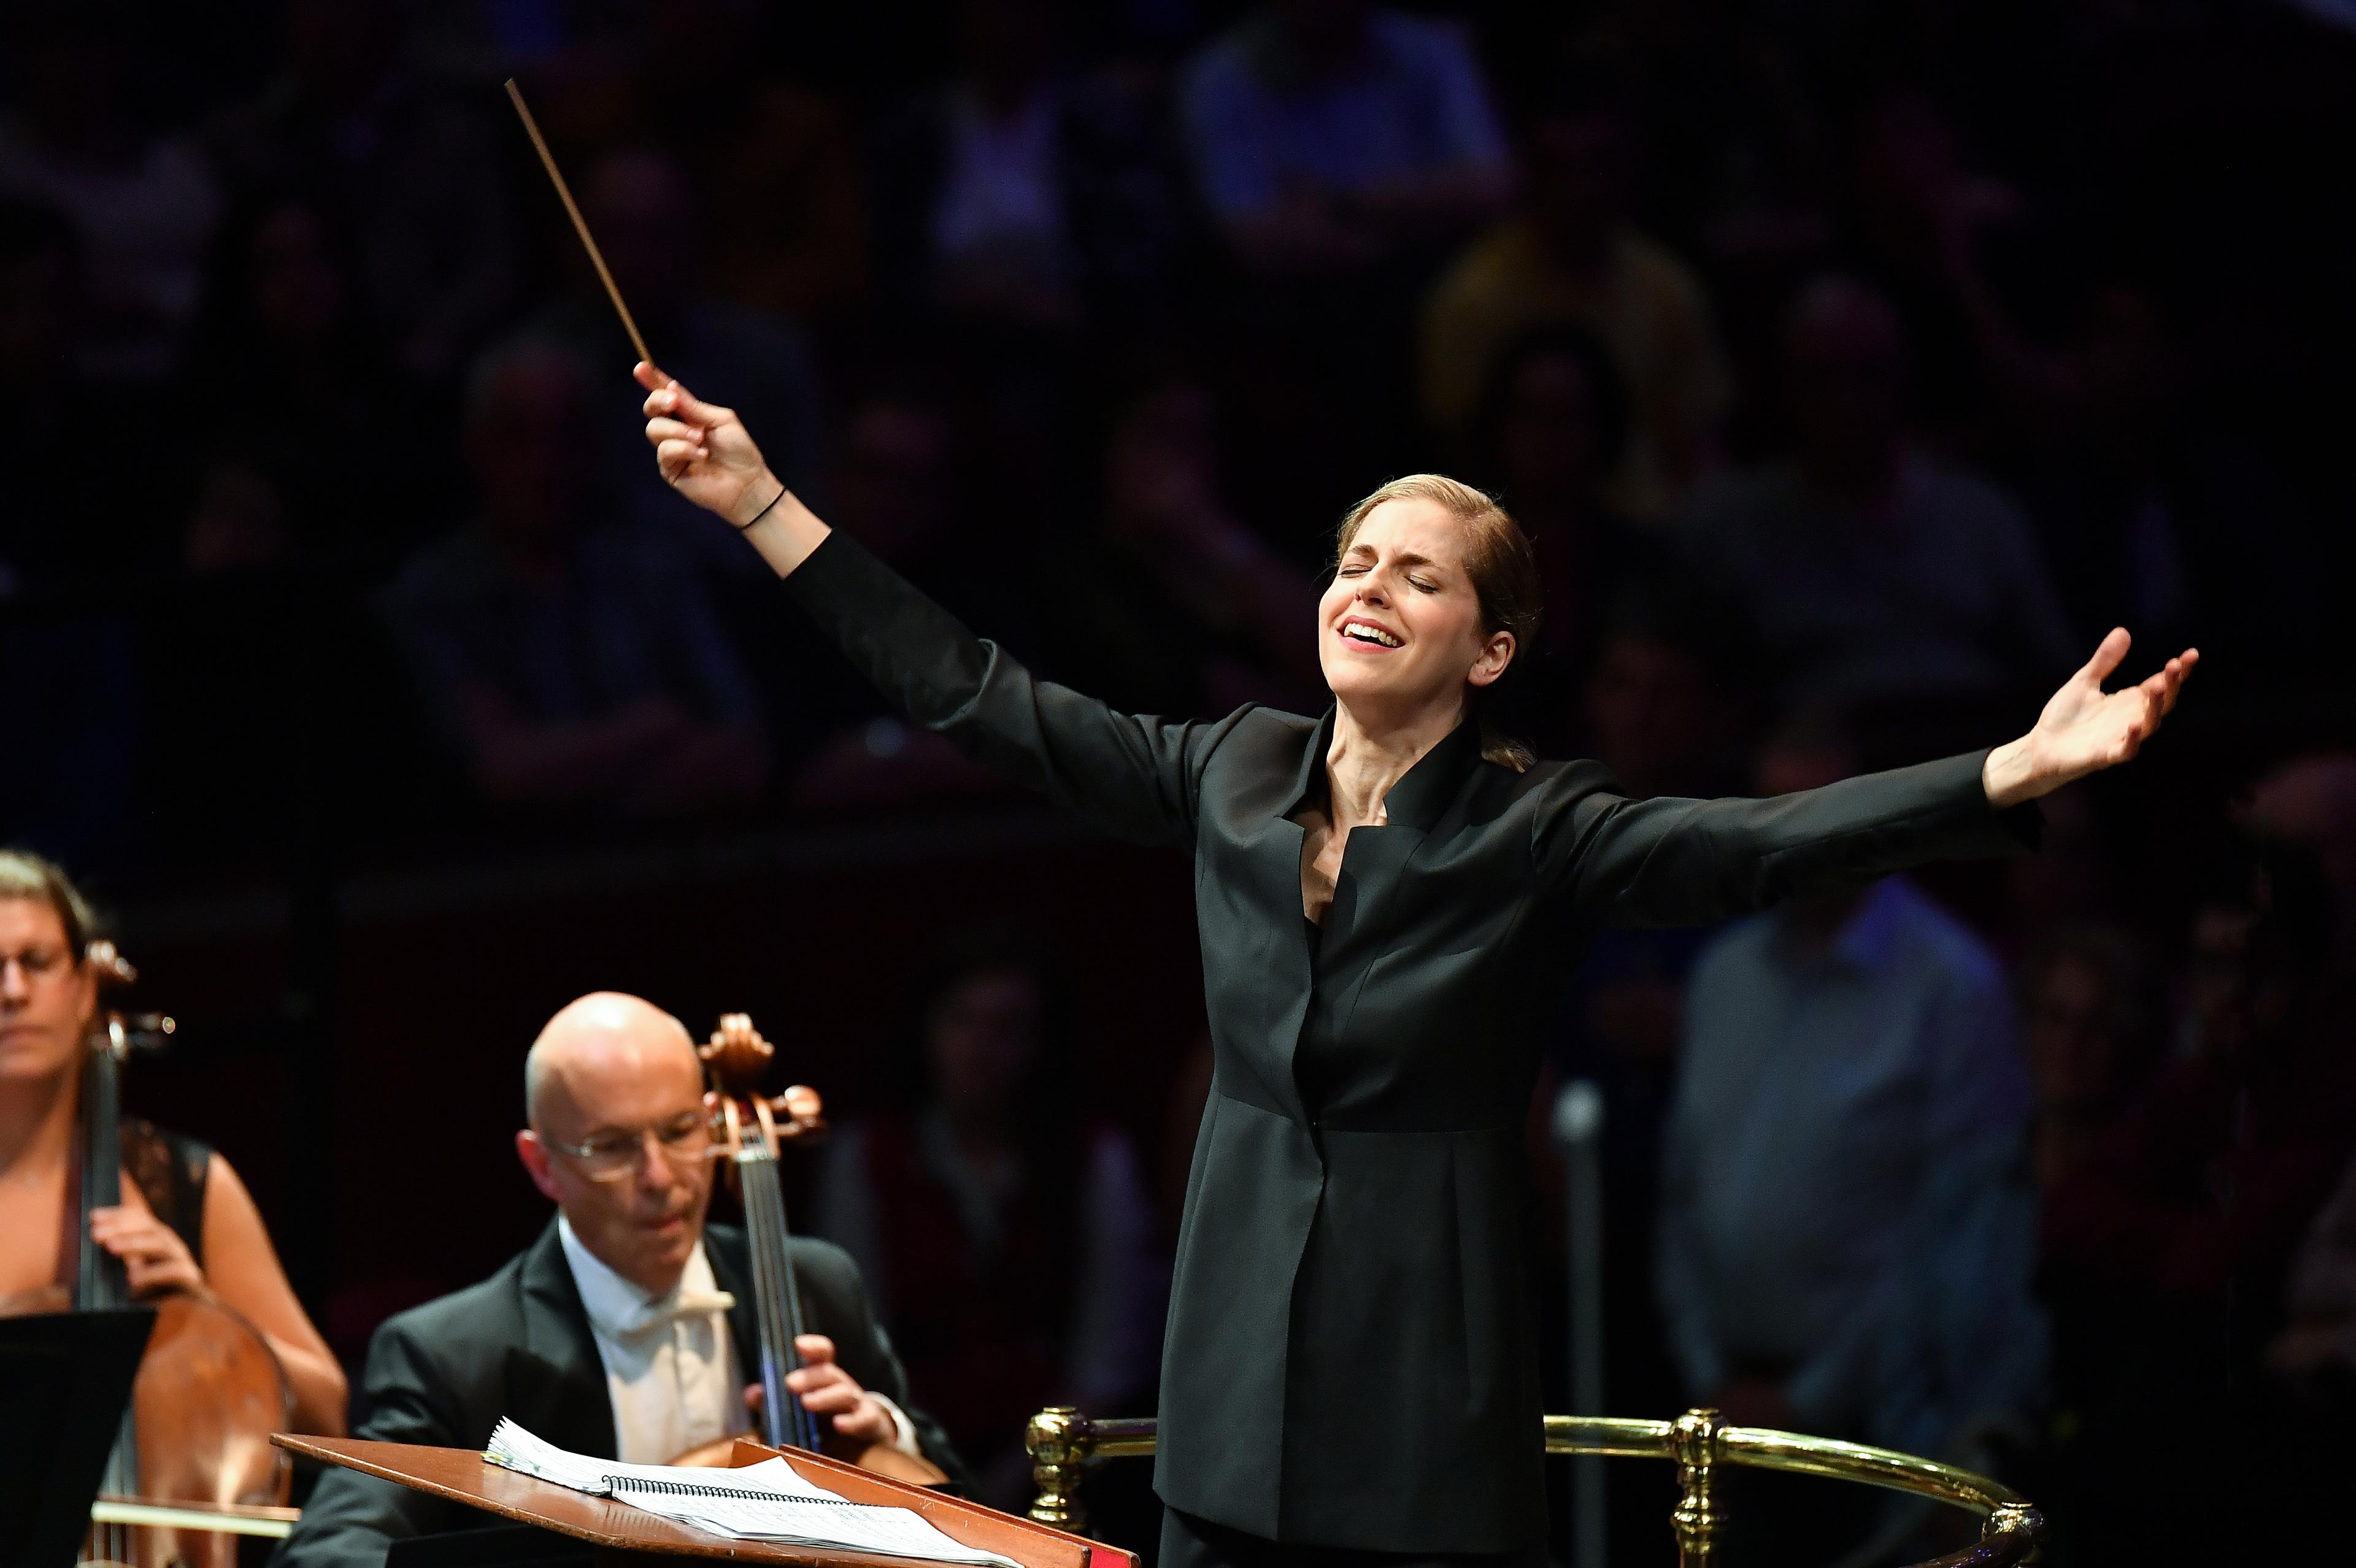 Karina Canellakis, a white woman with blonde hair wearing a black suit, in front of a orchestra with her arms out stretched